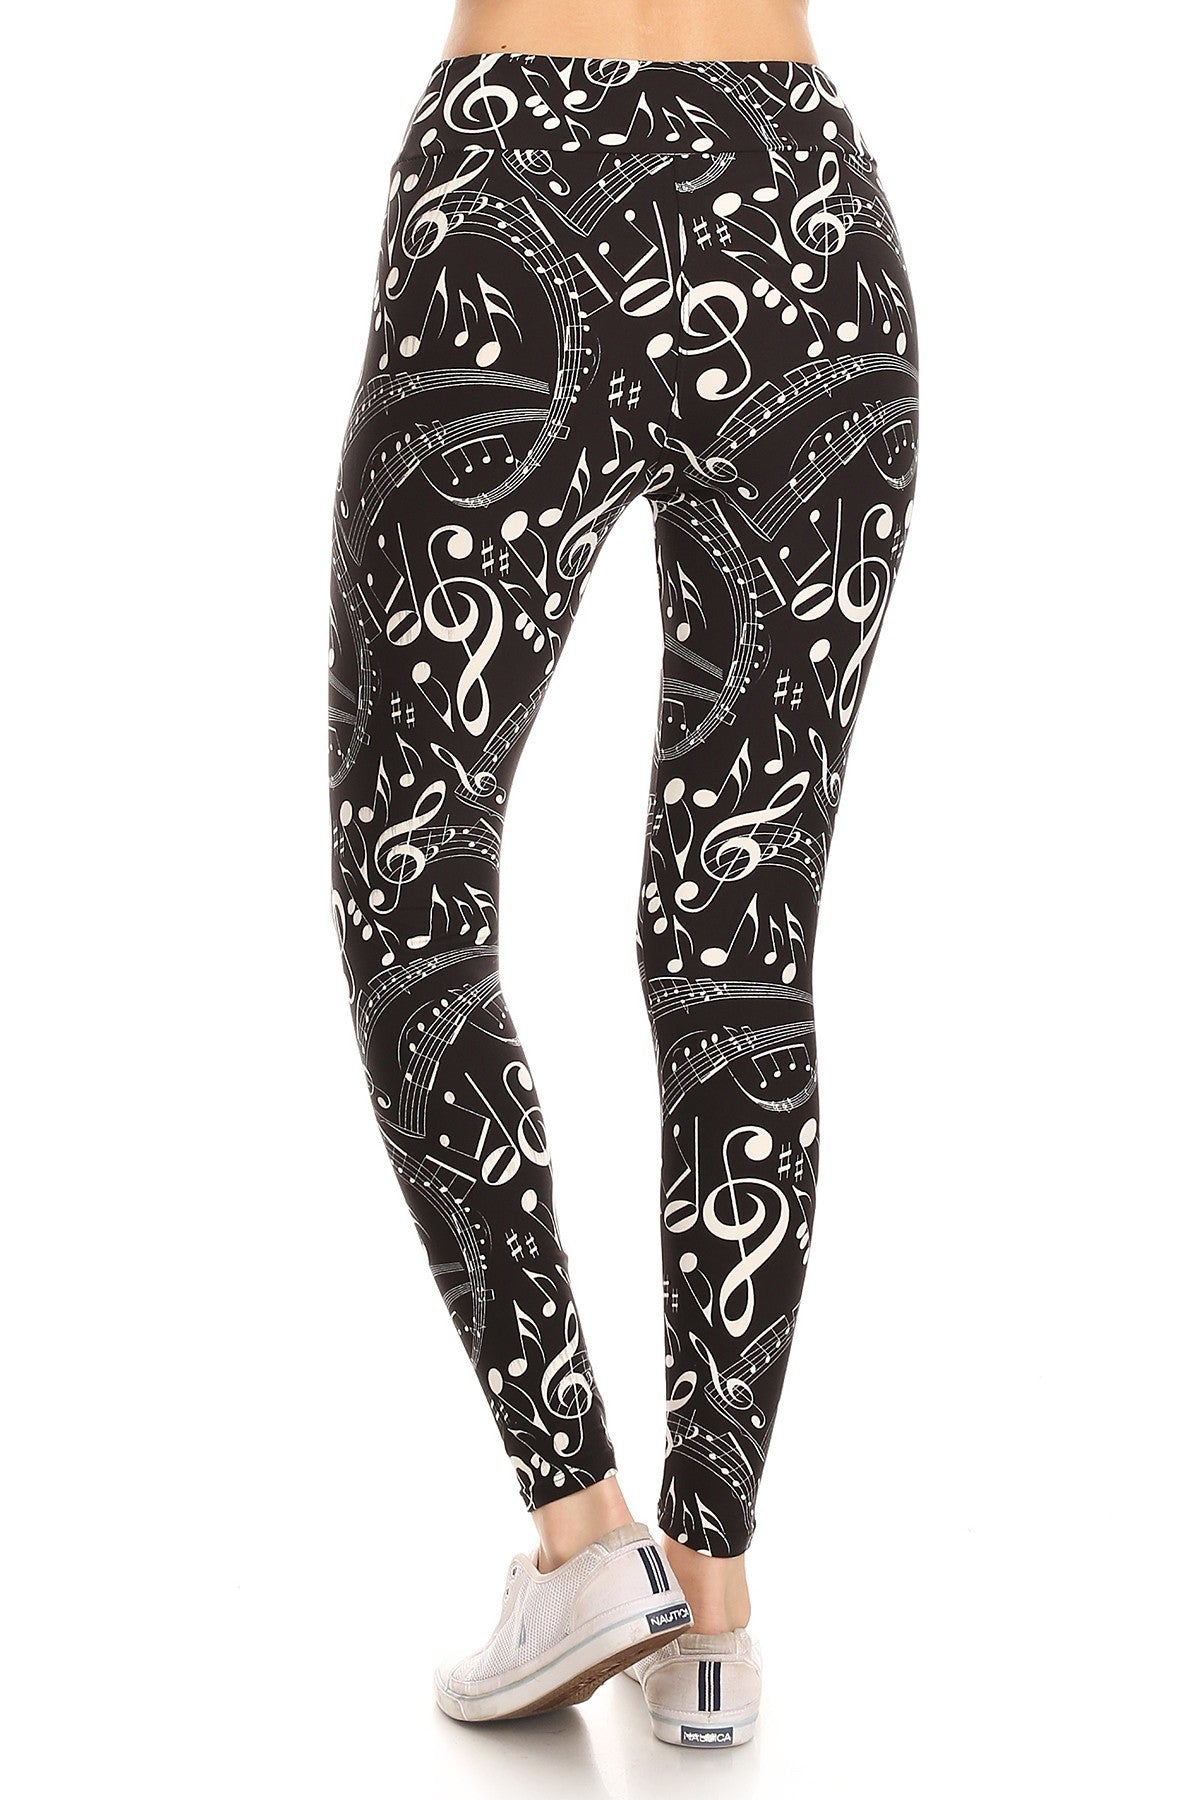 Yoga Style Banded Lined Music Note Print, Full Length Leggings In A Slim Fitting Style With A Banded High Waist - Tigbul's Fashion